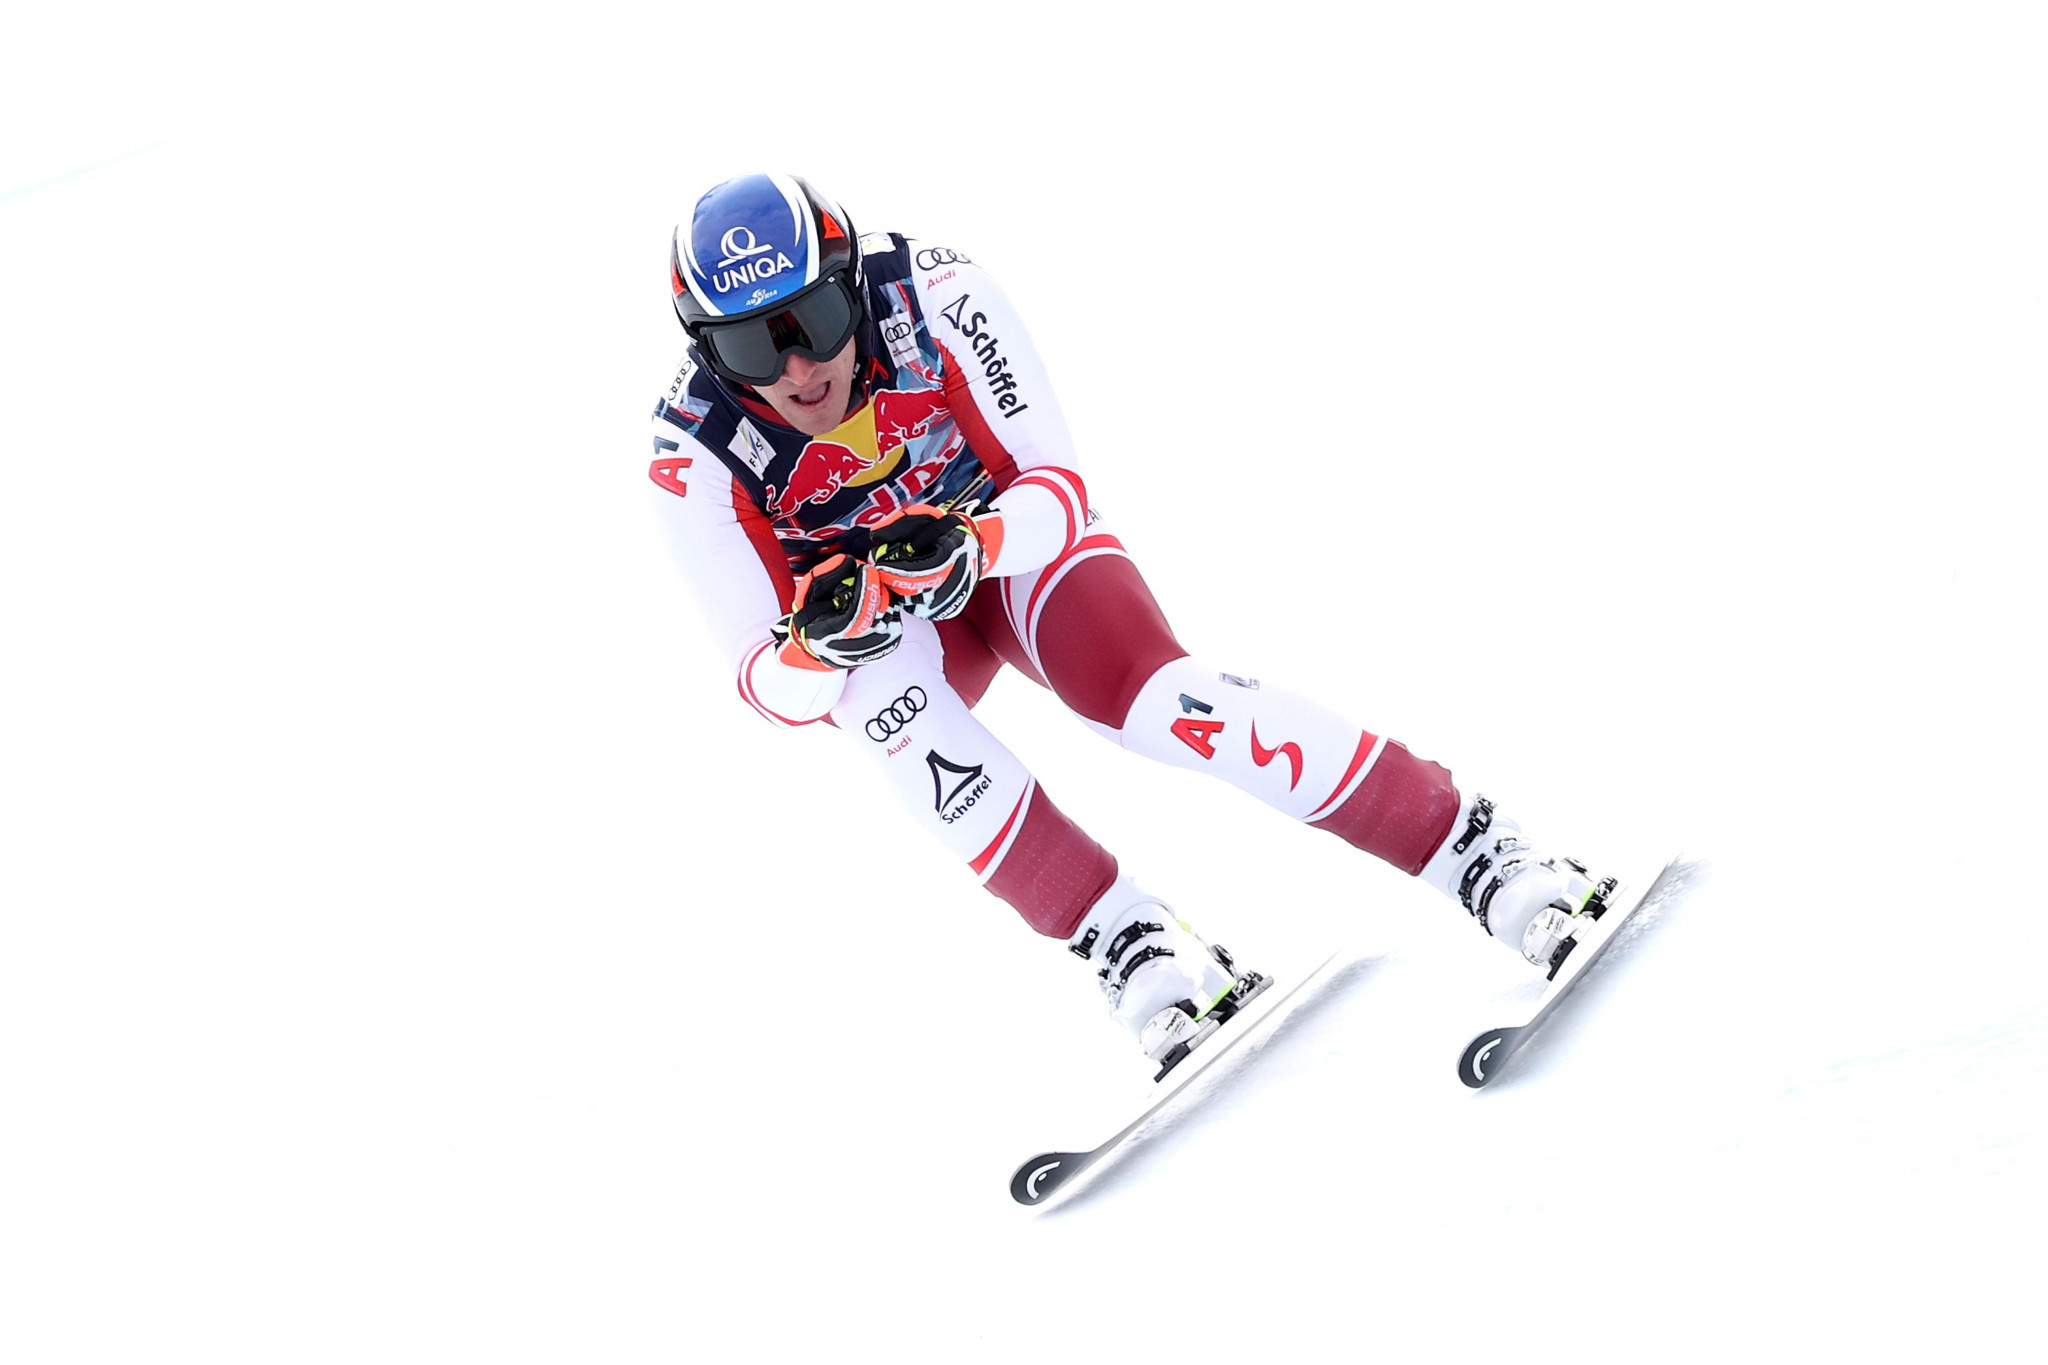 Austria's Matthias Mayer will be among the contenders in the men's downhill in Kitzbuehel ©Getty Images